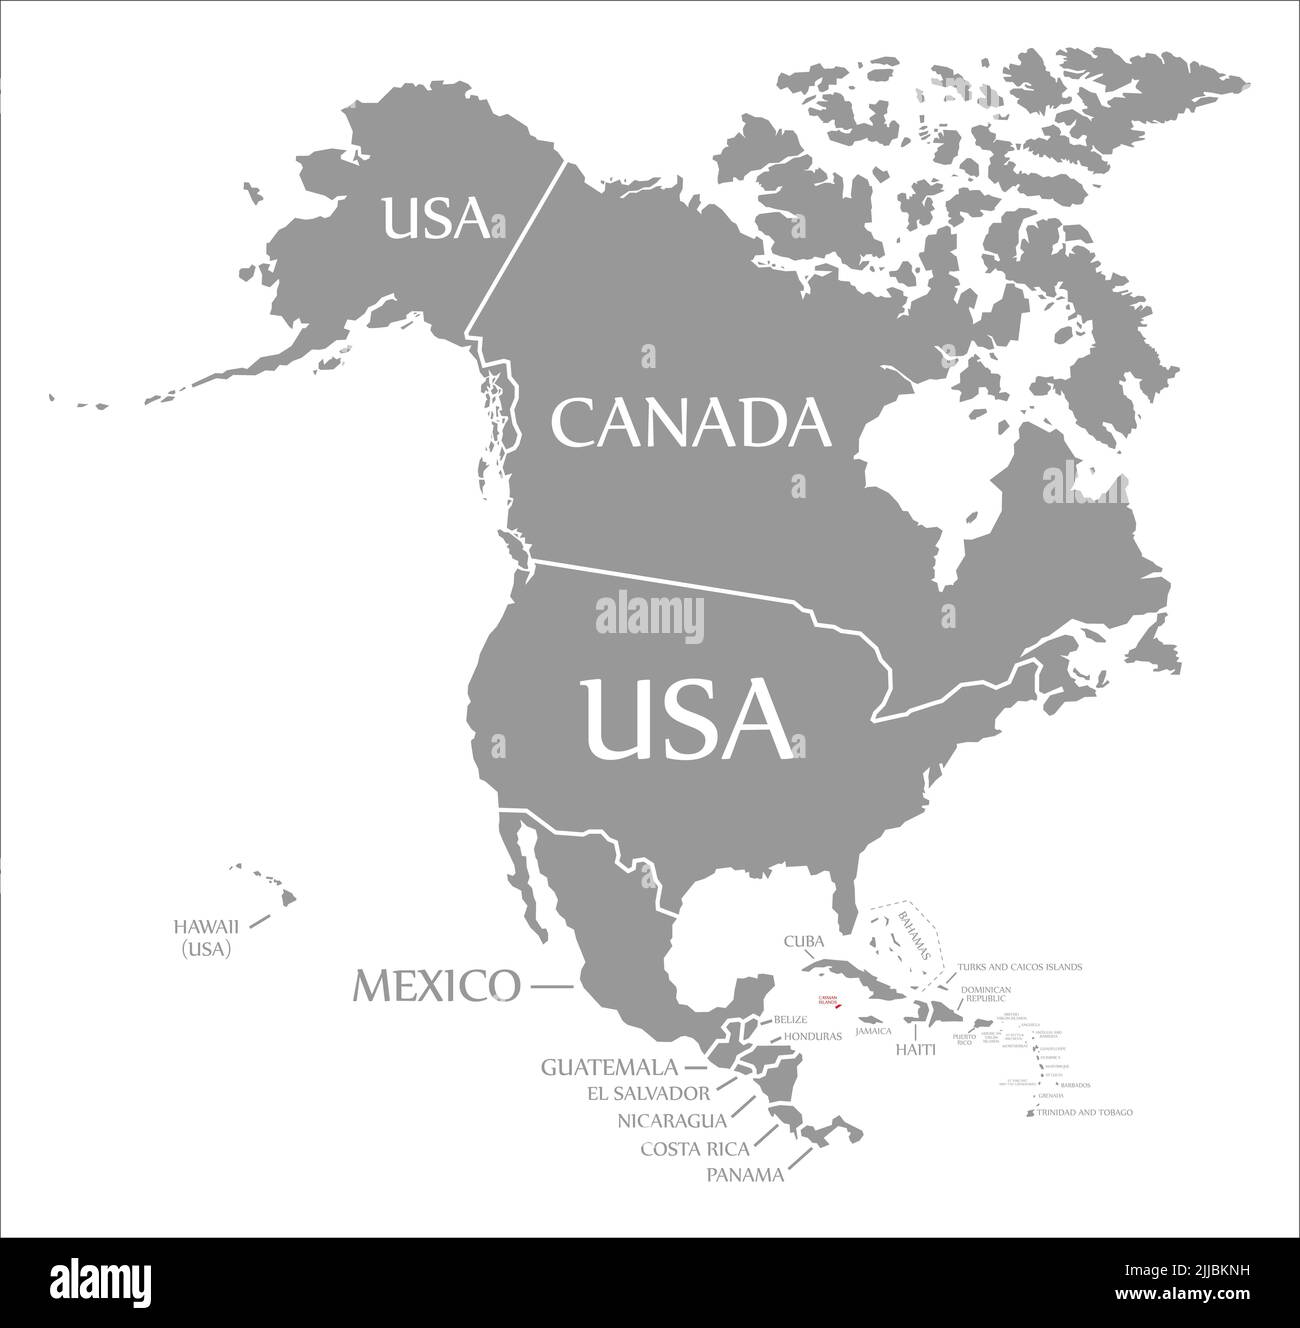 Cayman Islands red highlighted in map of North America Stock Photo